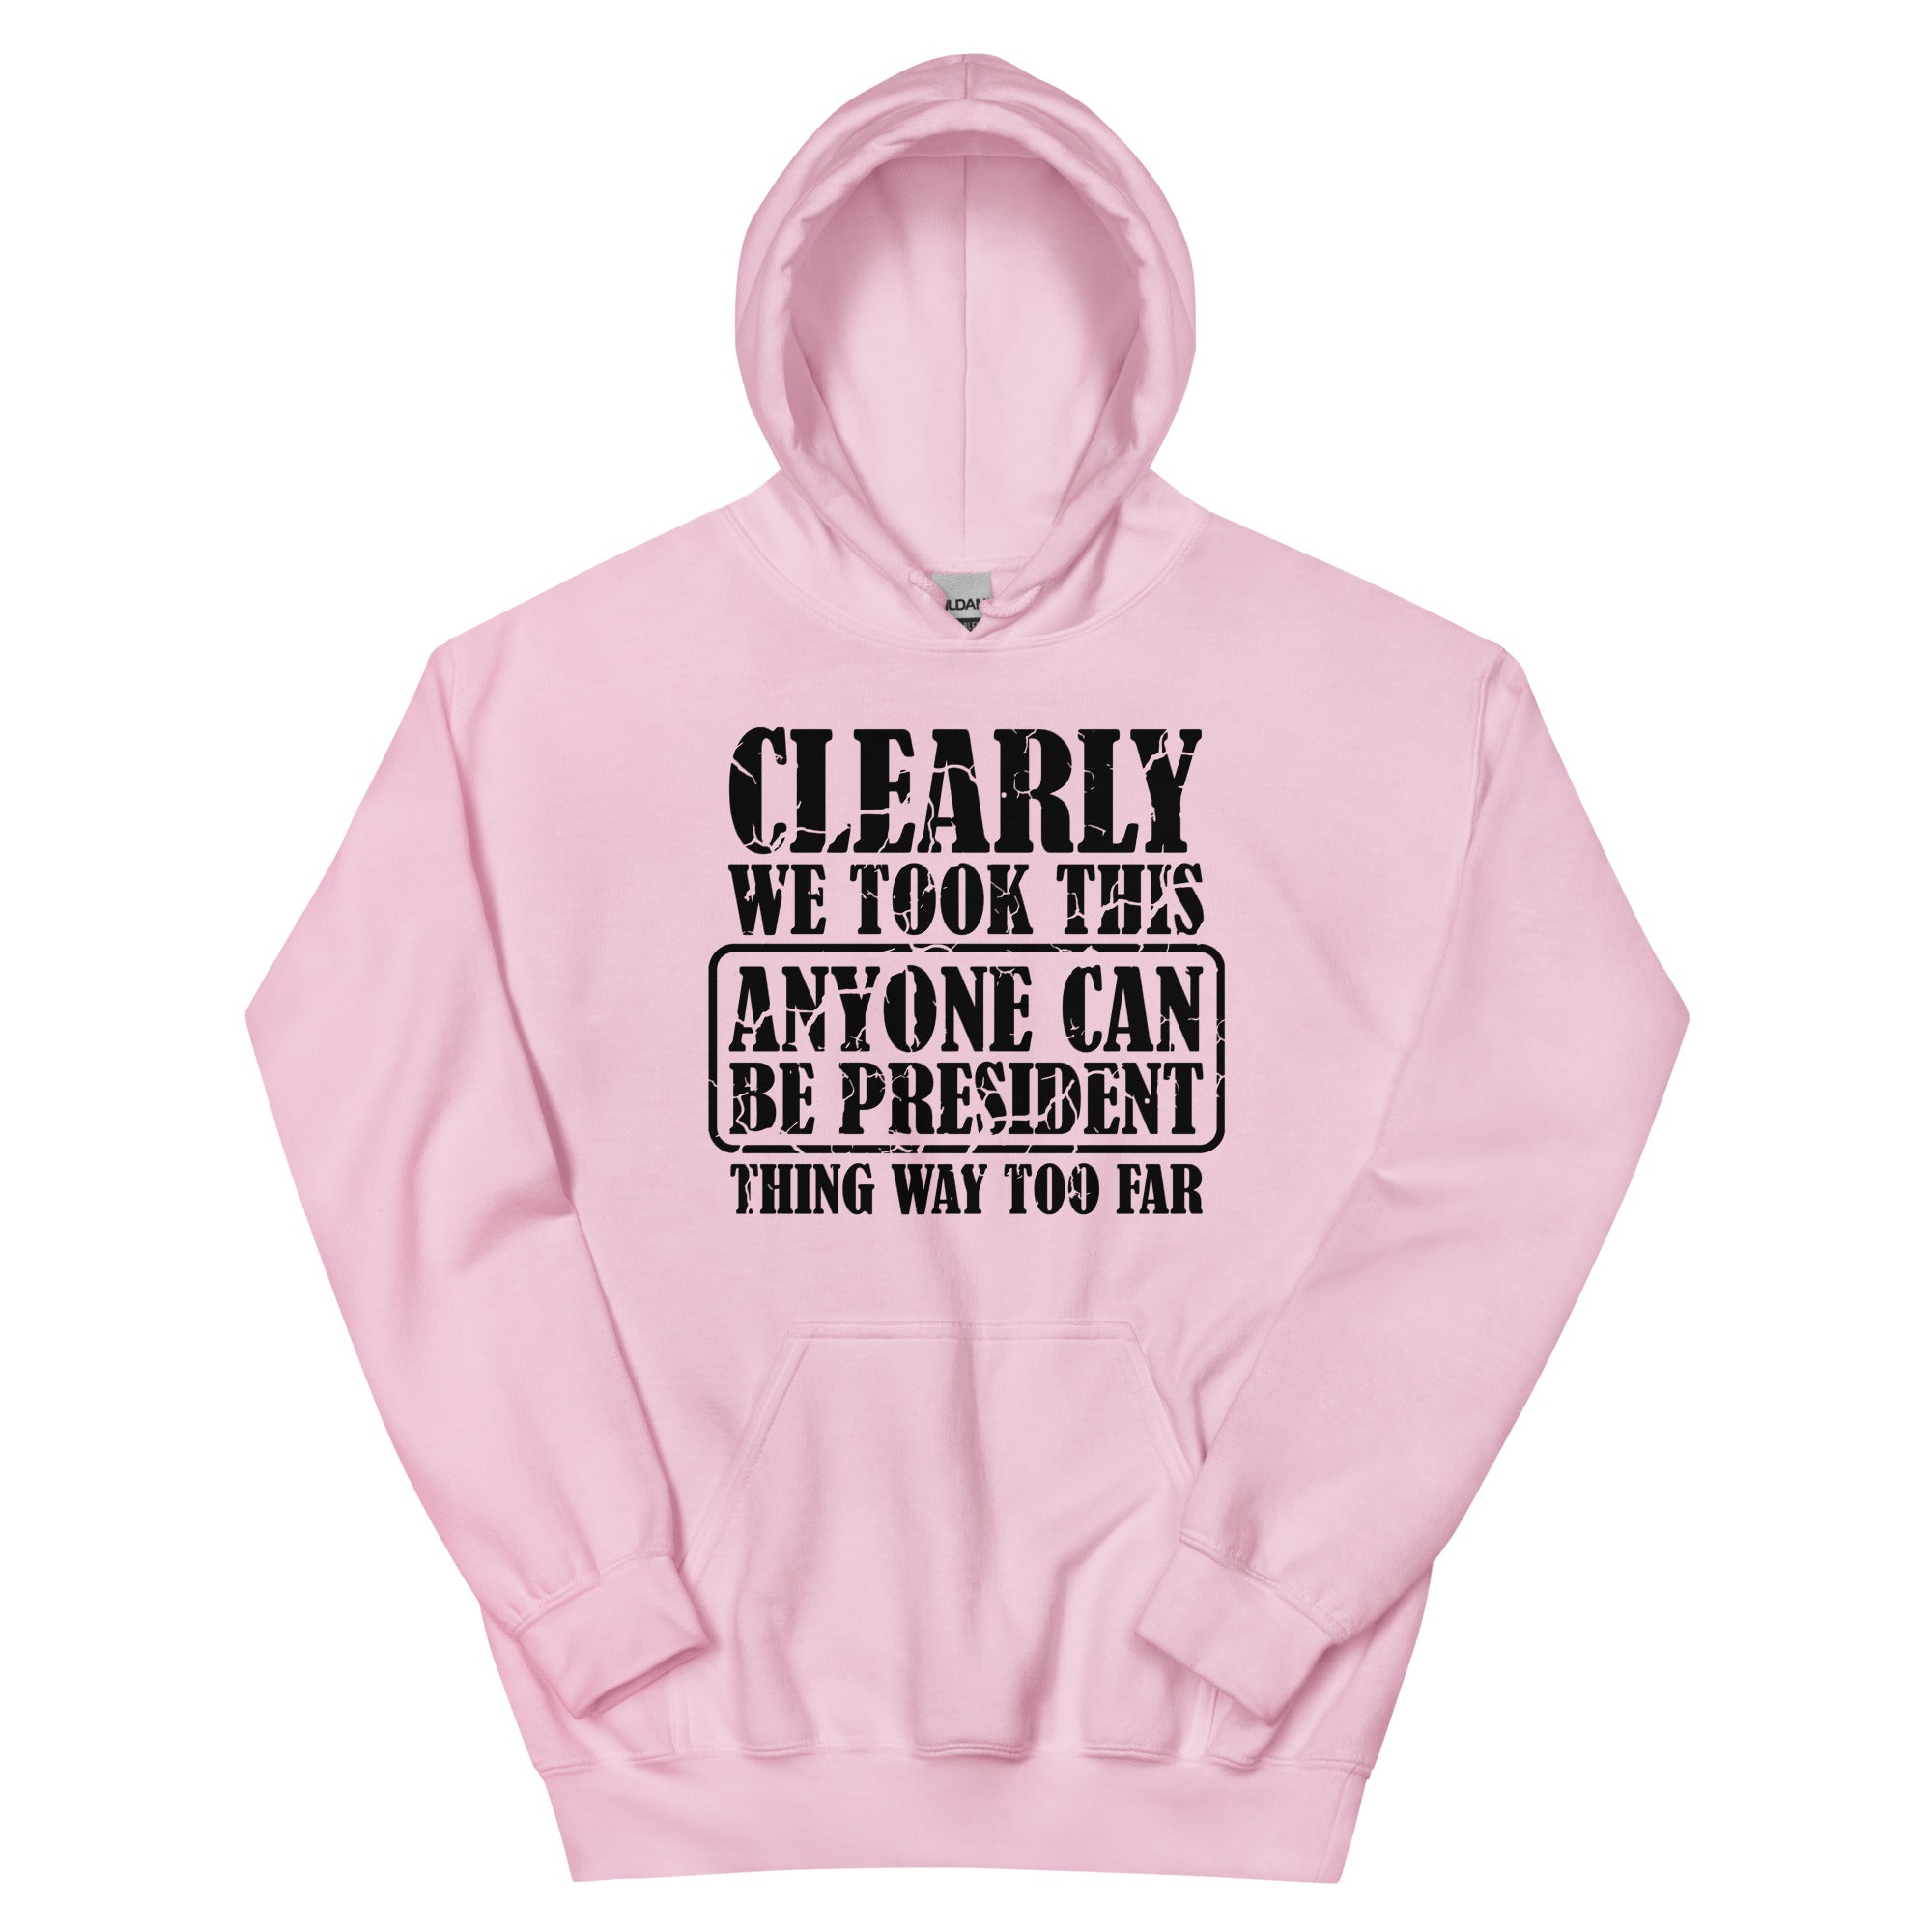 Anyone Can Be President - Unisex Hoodie